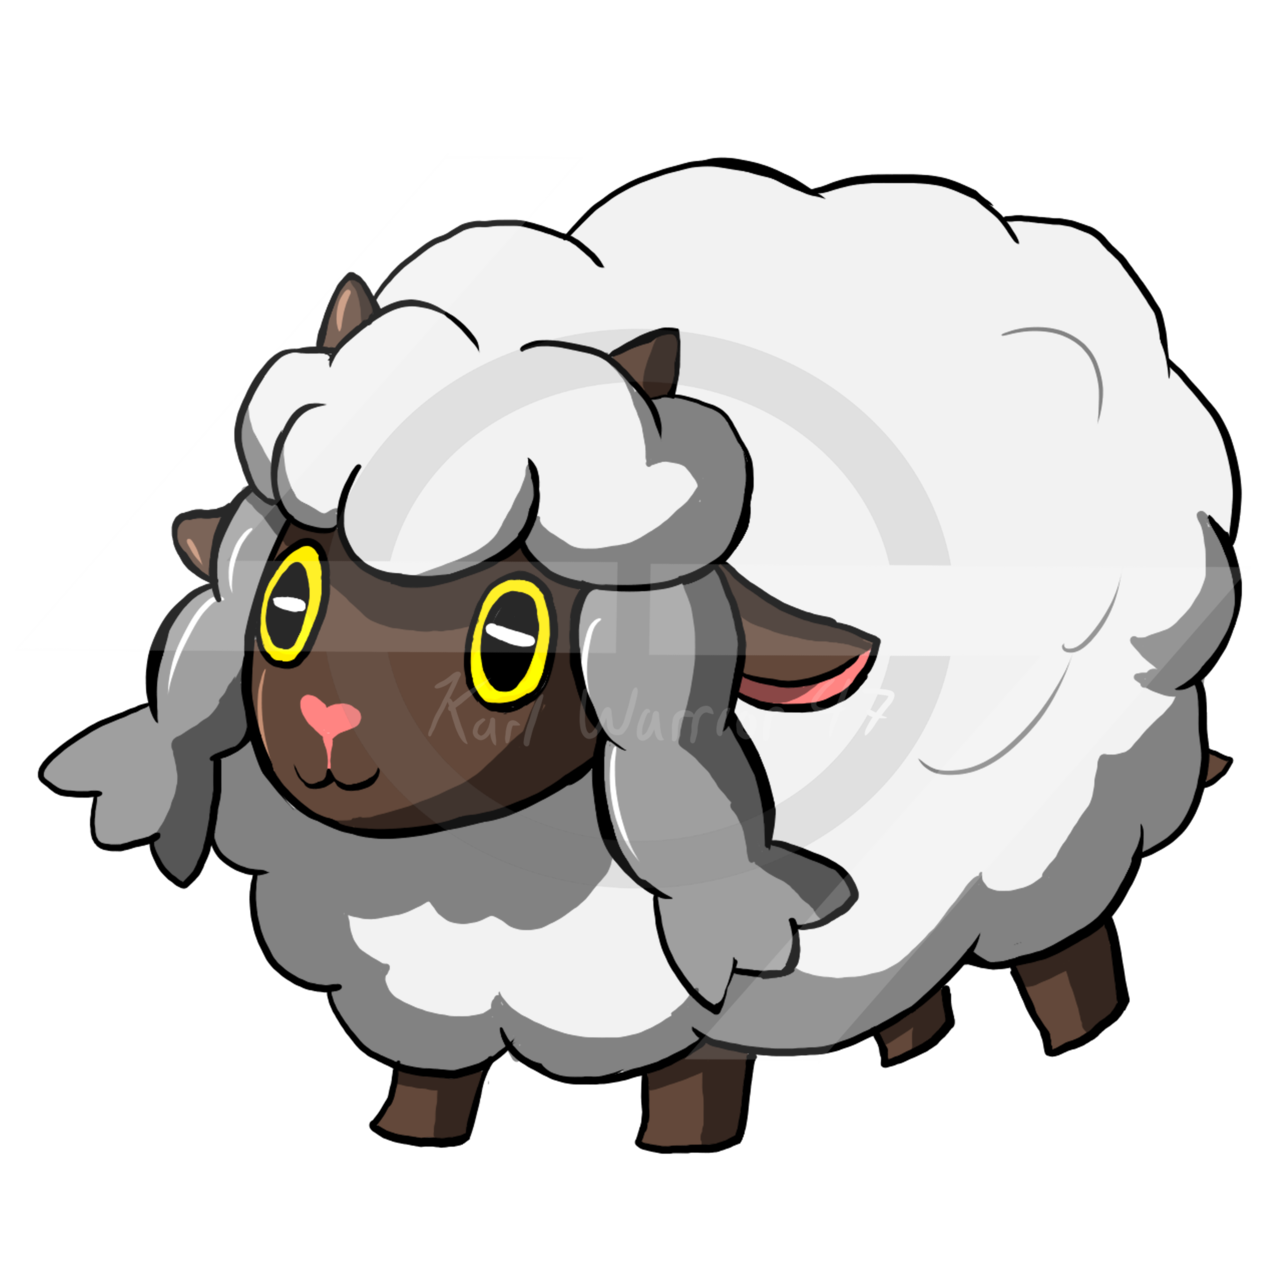 A Wandering Masked Phantom Wooloo The Sheep Pokemon From The Recent 6 5 19